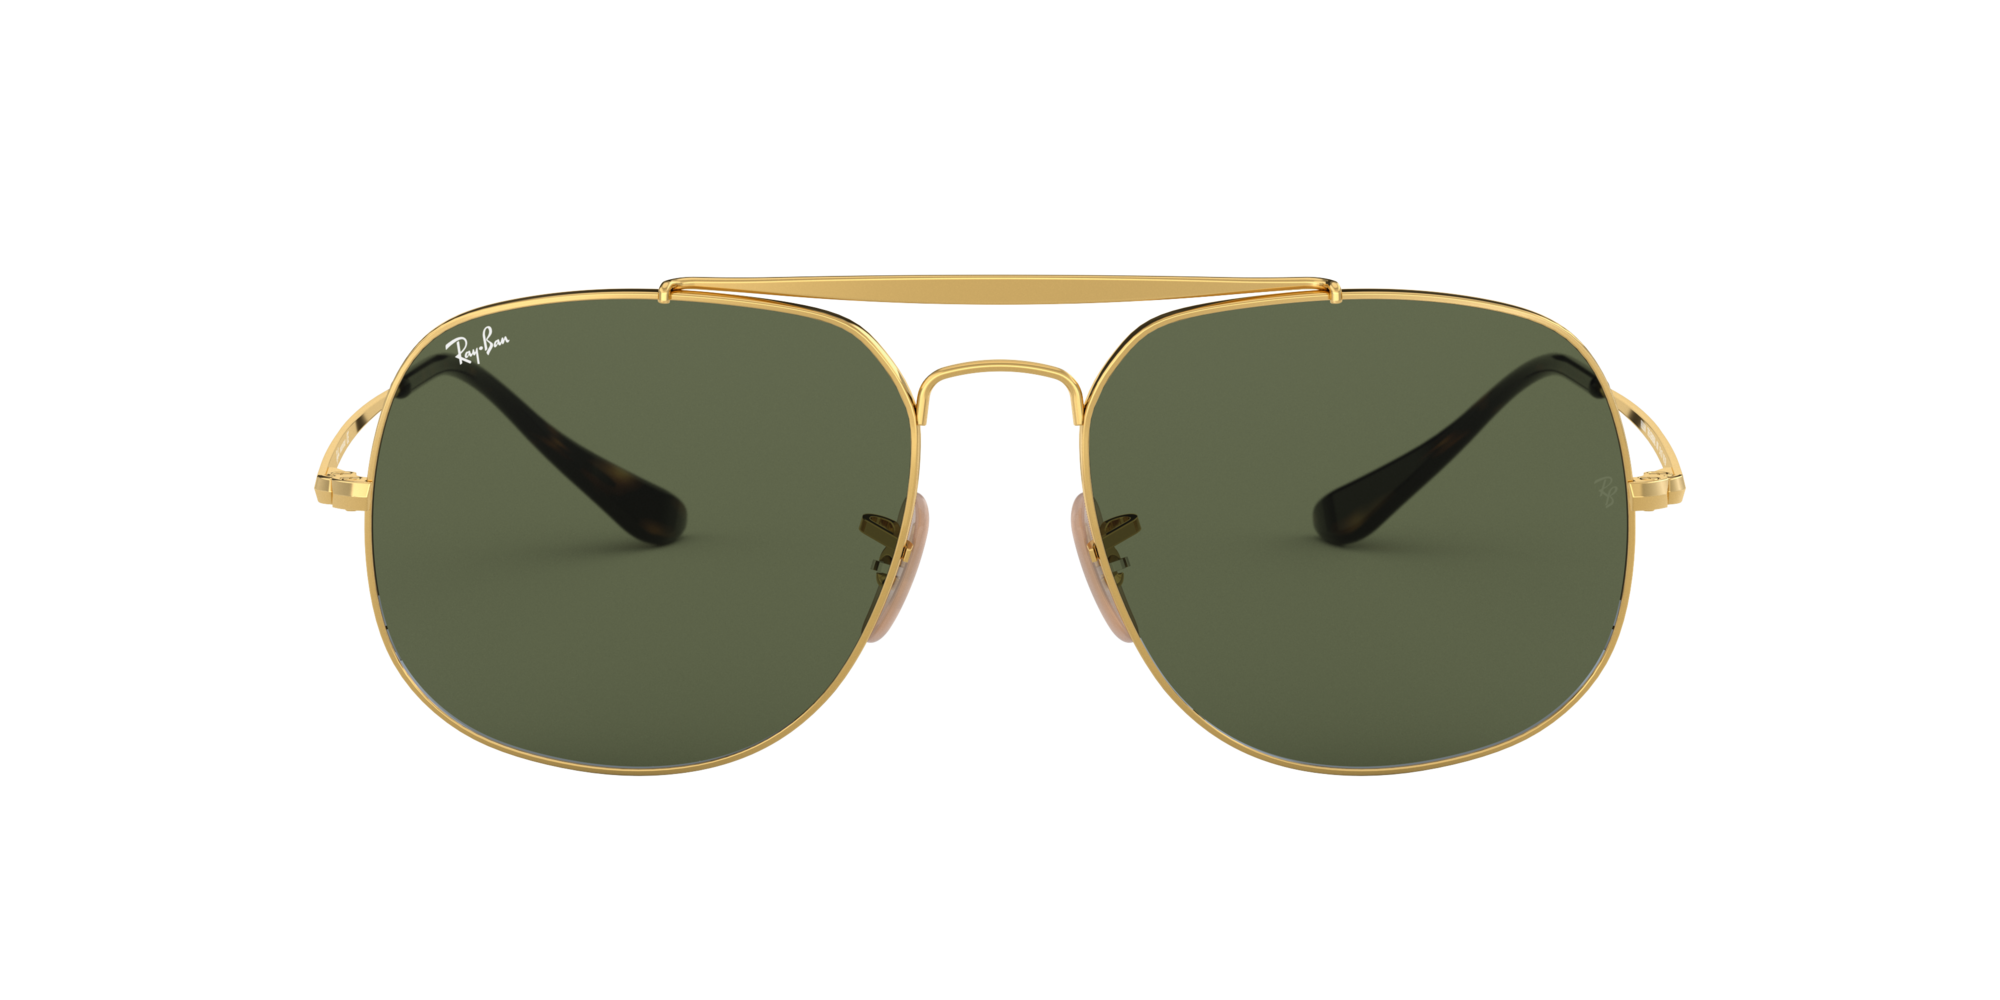 Ray-Ban 0RB3561 in Gold Sunglasses | OPSM